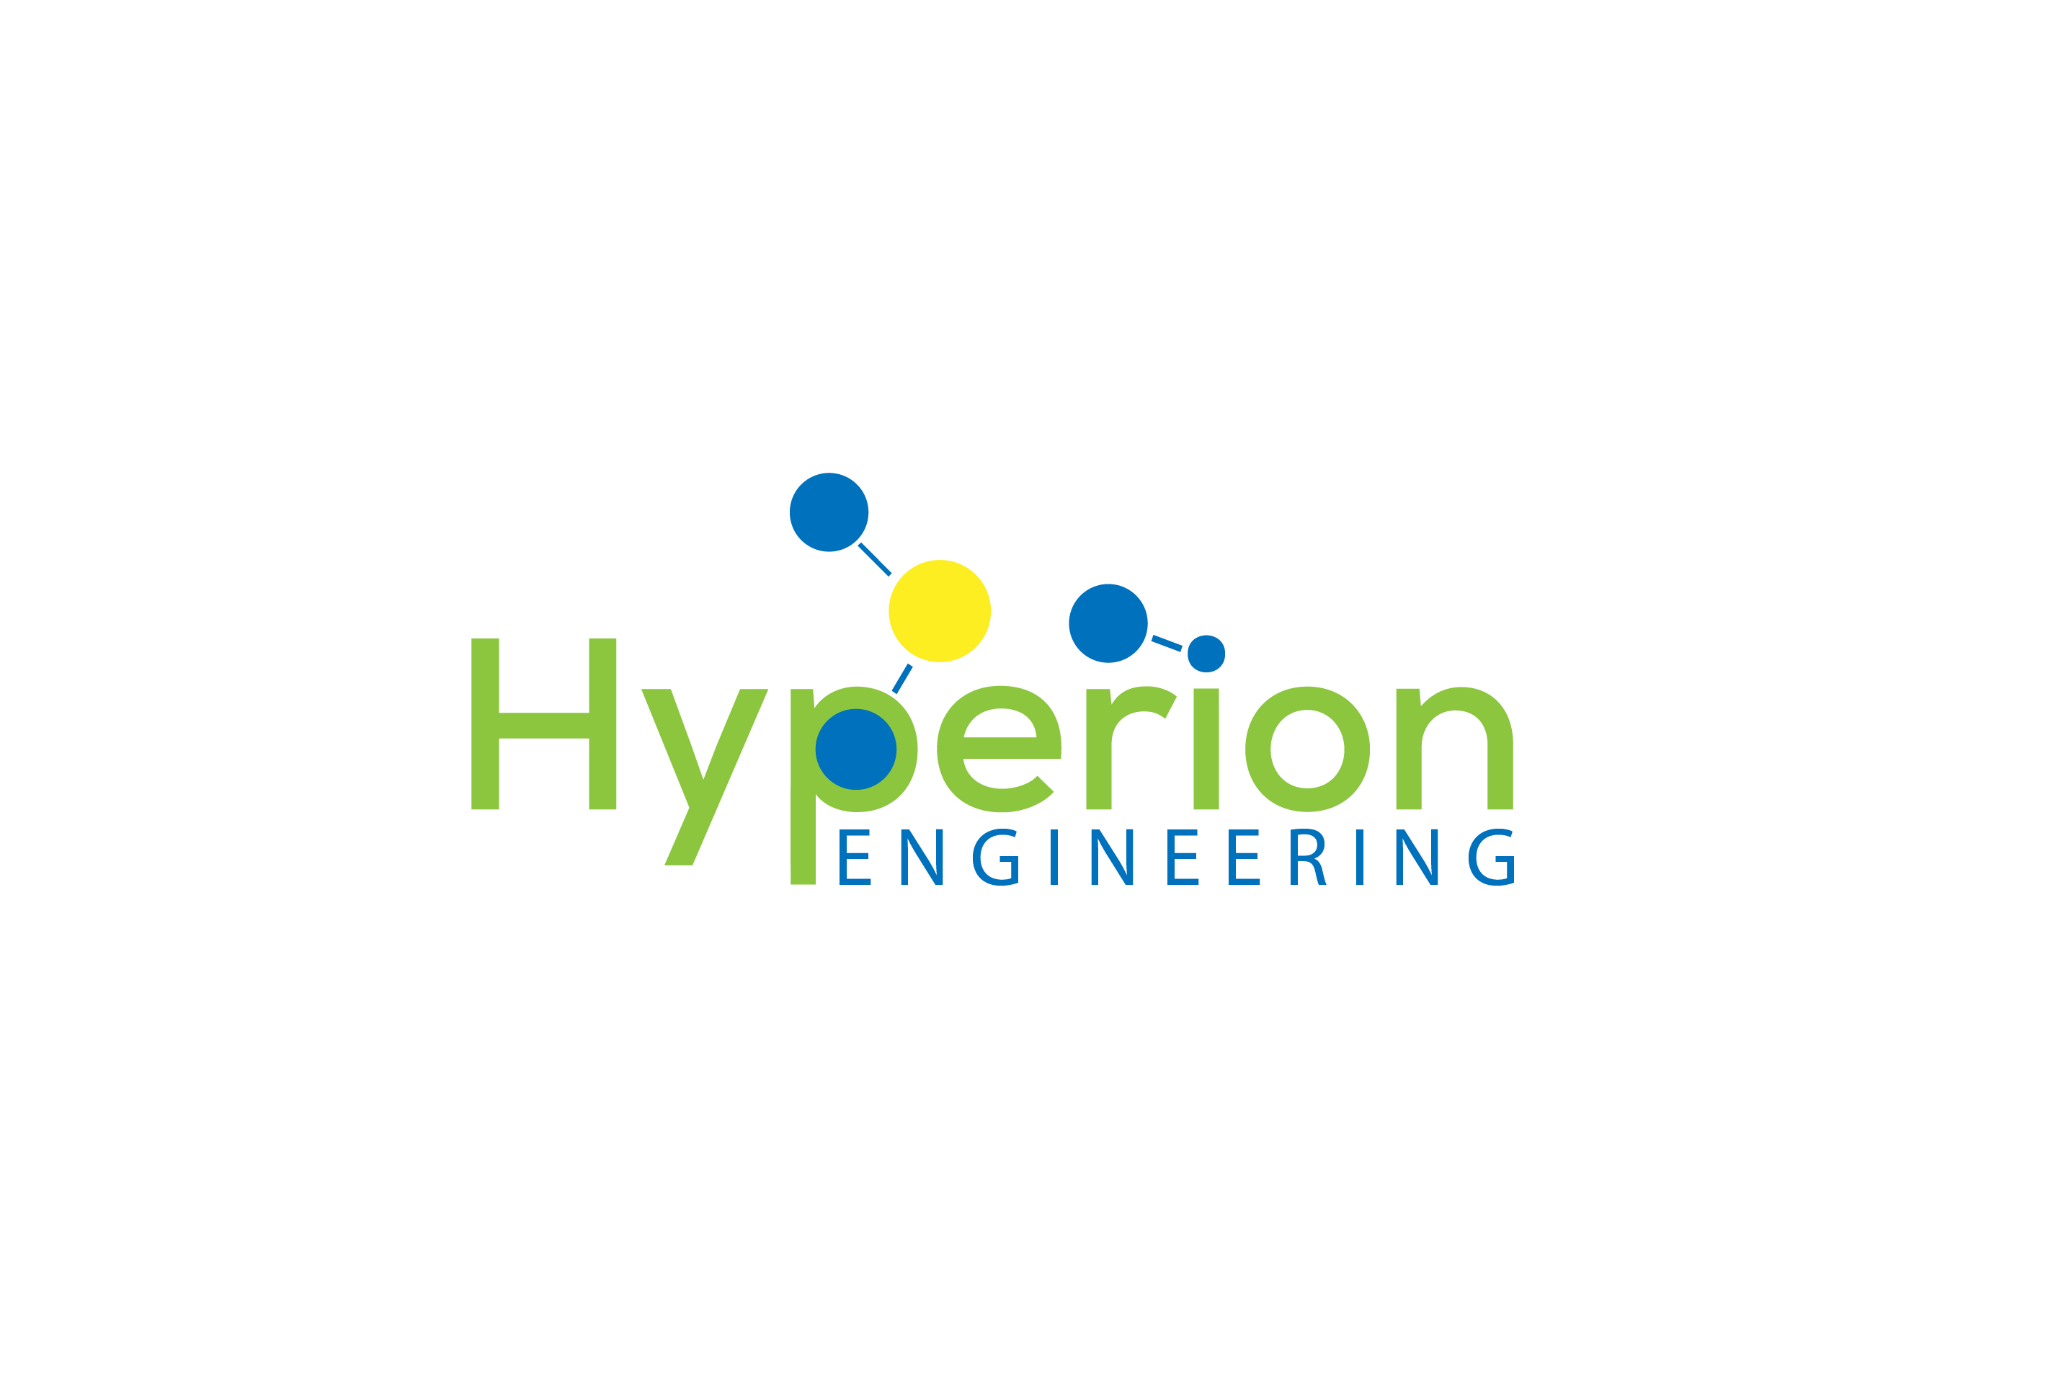 Hyperion Engineering